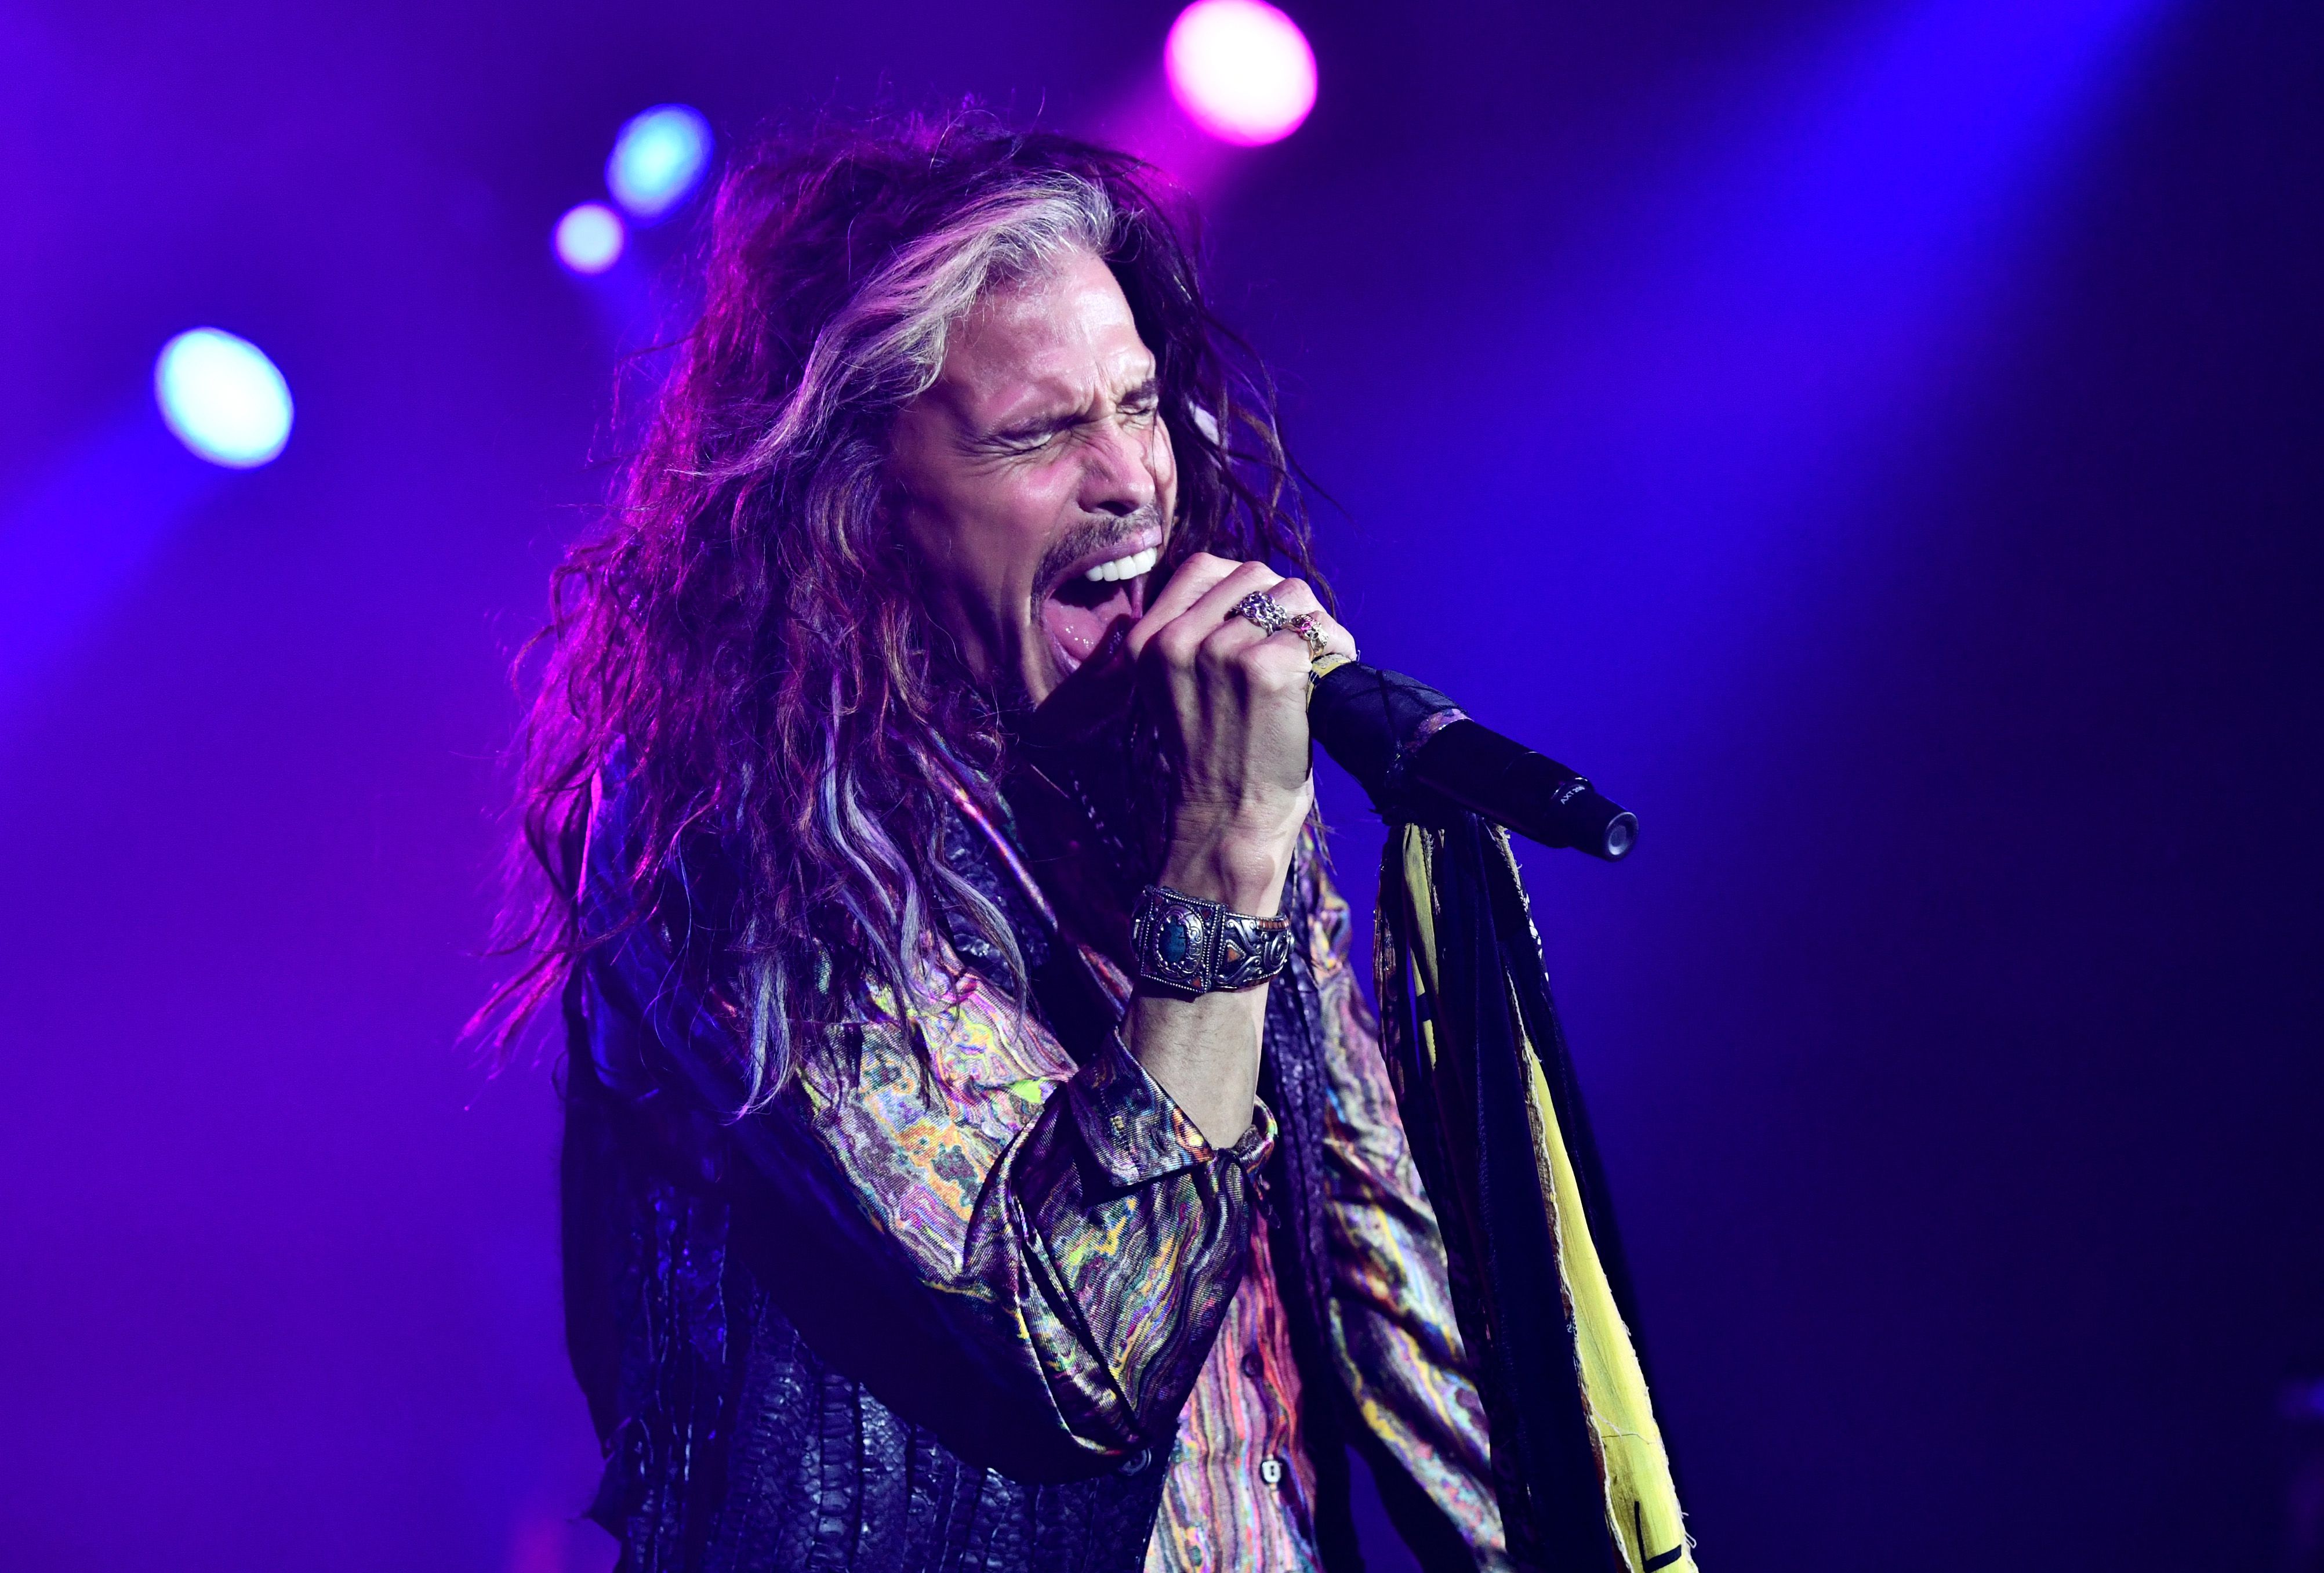 PHOENIX, AZ - MARCH 10: Steven Tyler performs onstage at Celebrity Fight Night XXIV on March 10, 2018 in Phoenix, Arizona. (Photo by Emma McIntyre/Getty Images for Celebrity Fight Night)